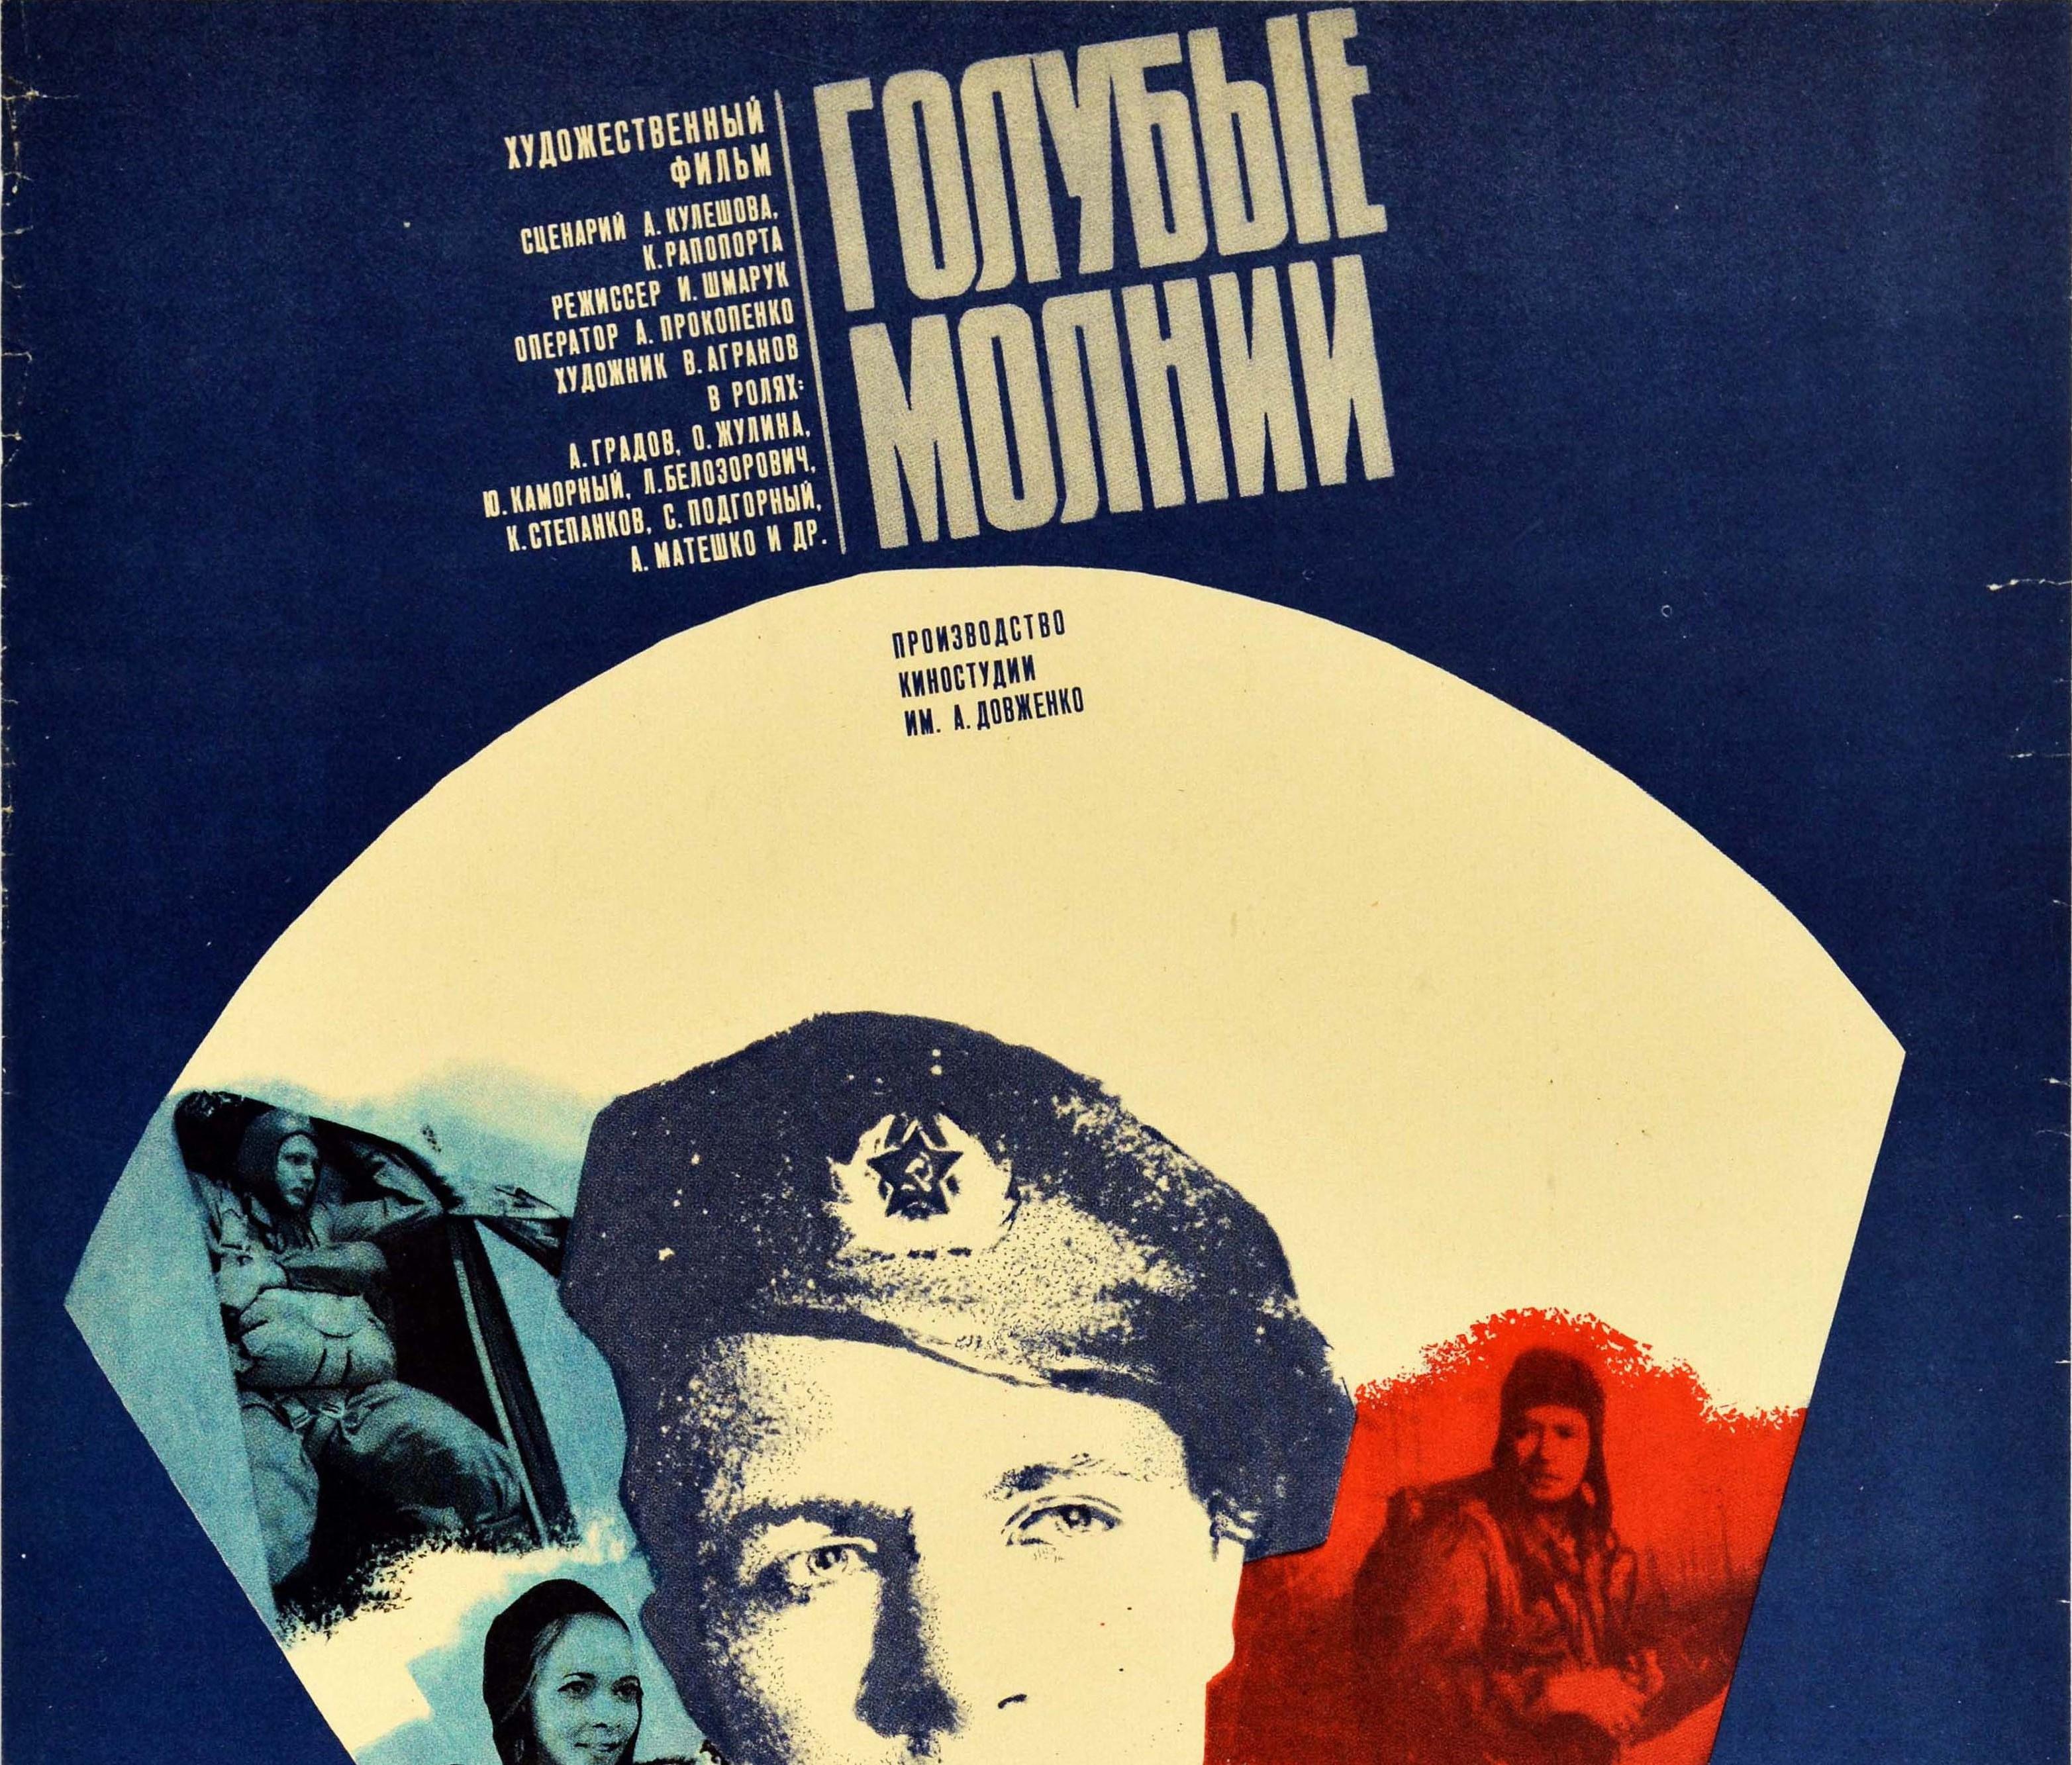 Original vintage film poster for a Soviet adventure drama about a young dandy from Moscow who fails the university admission exams so gets drafted into the paratrooper regiment instead - ??????? ?????? / Blue Lightning - directed by Isaak Shmaruk